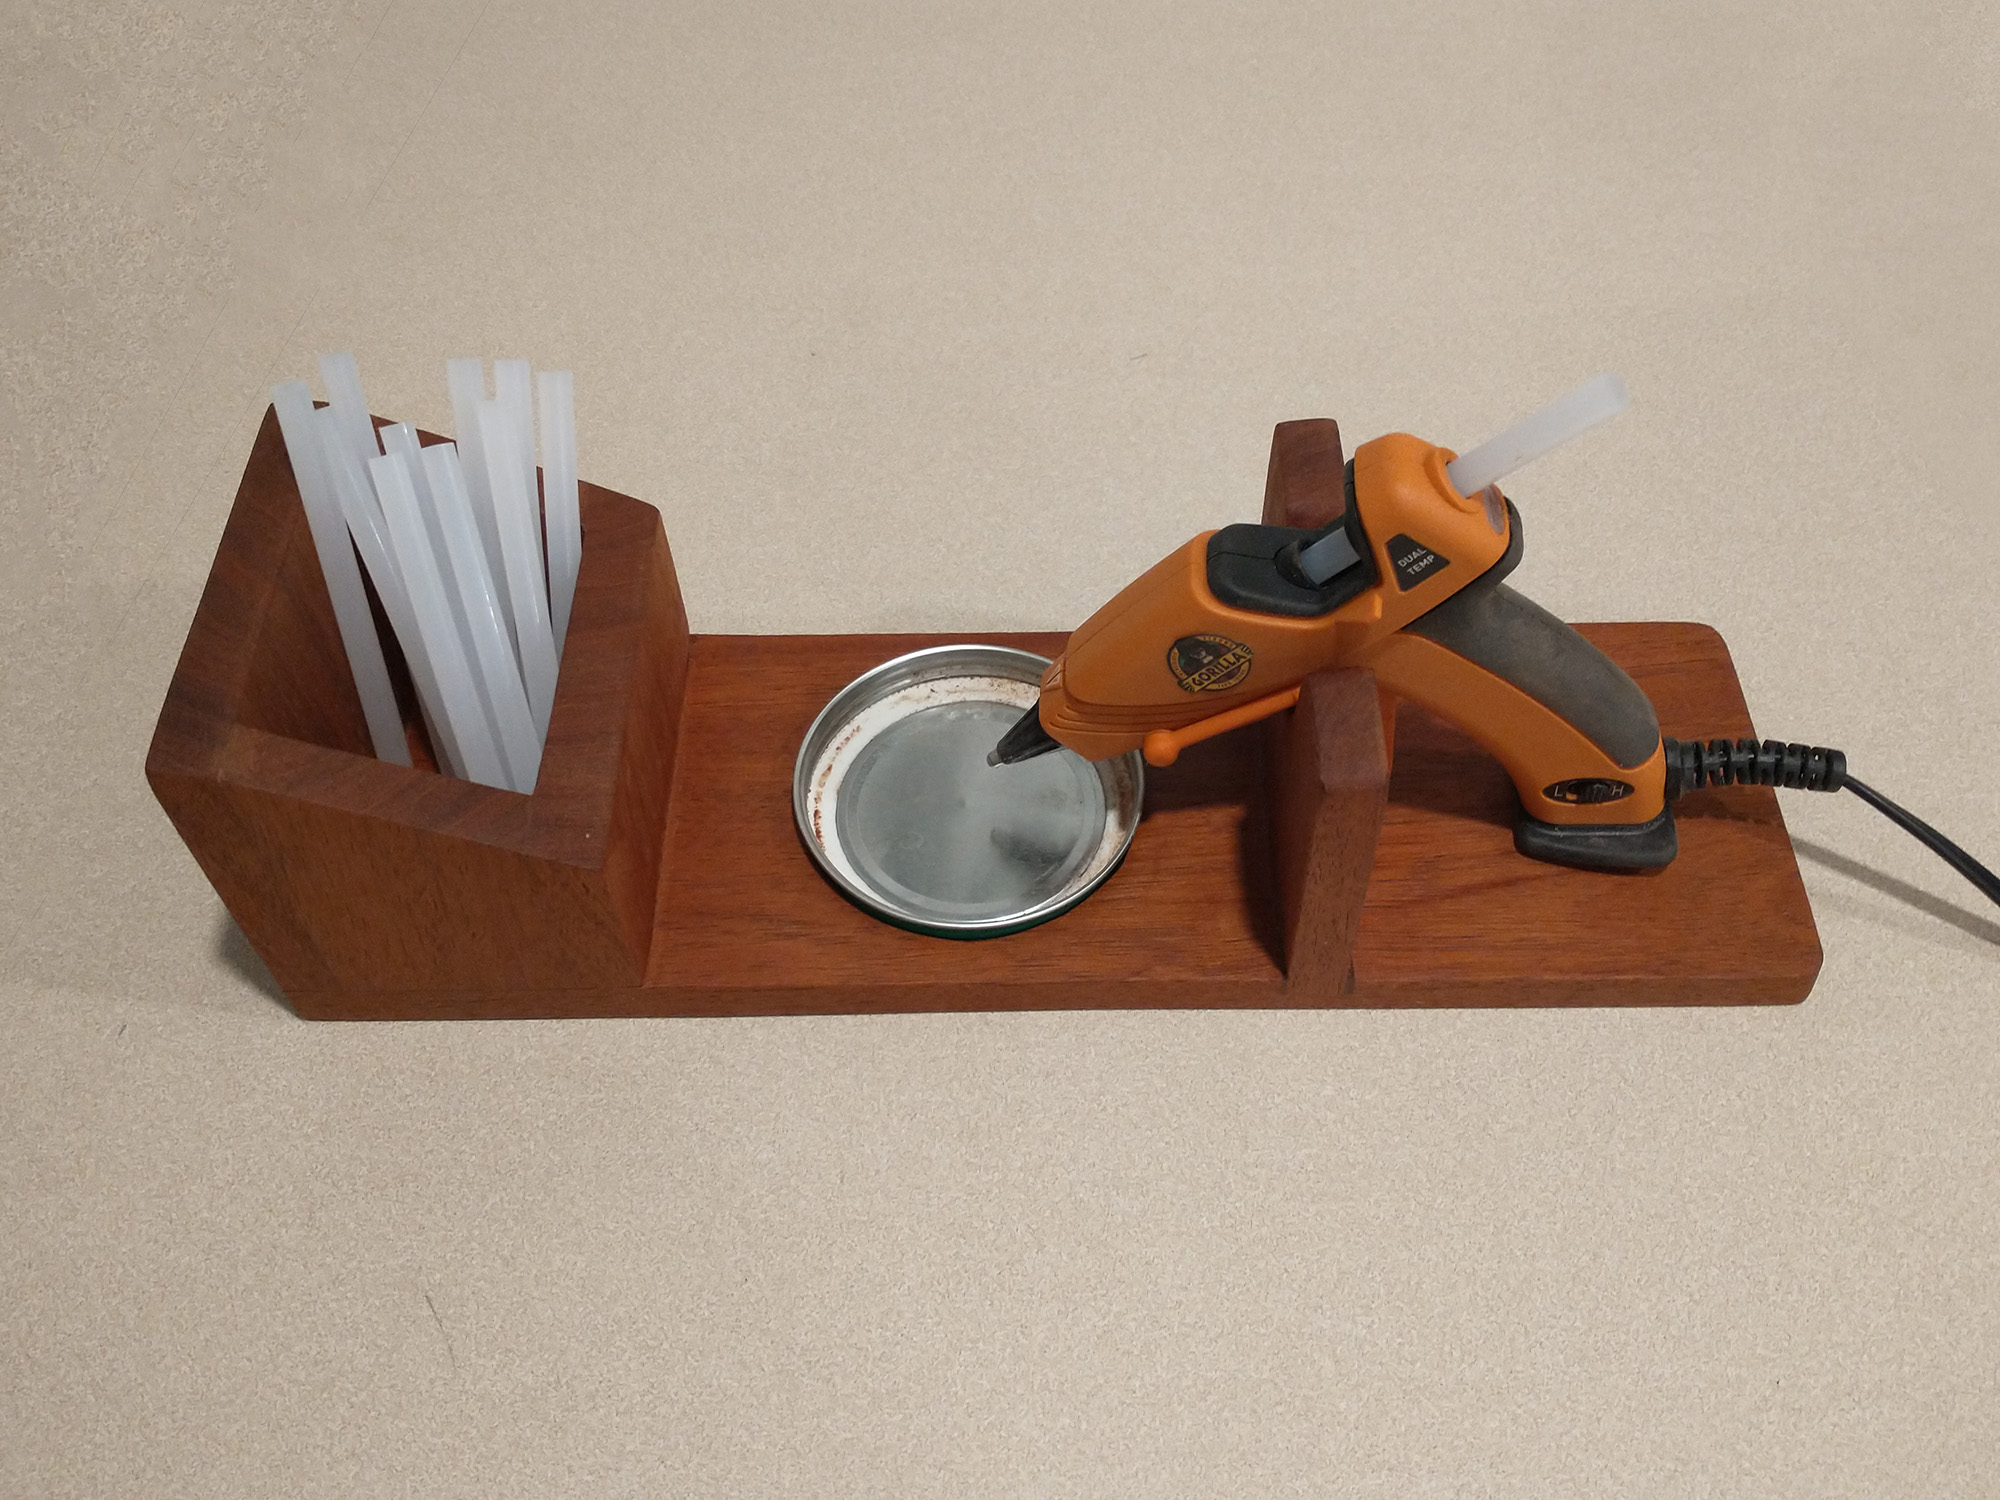 Hot Glue Gun Holder : 4 Steps (with Pictures) - Instructables